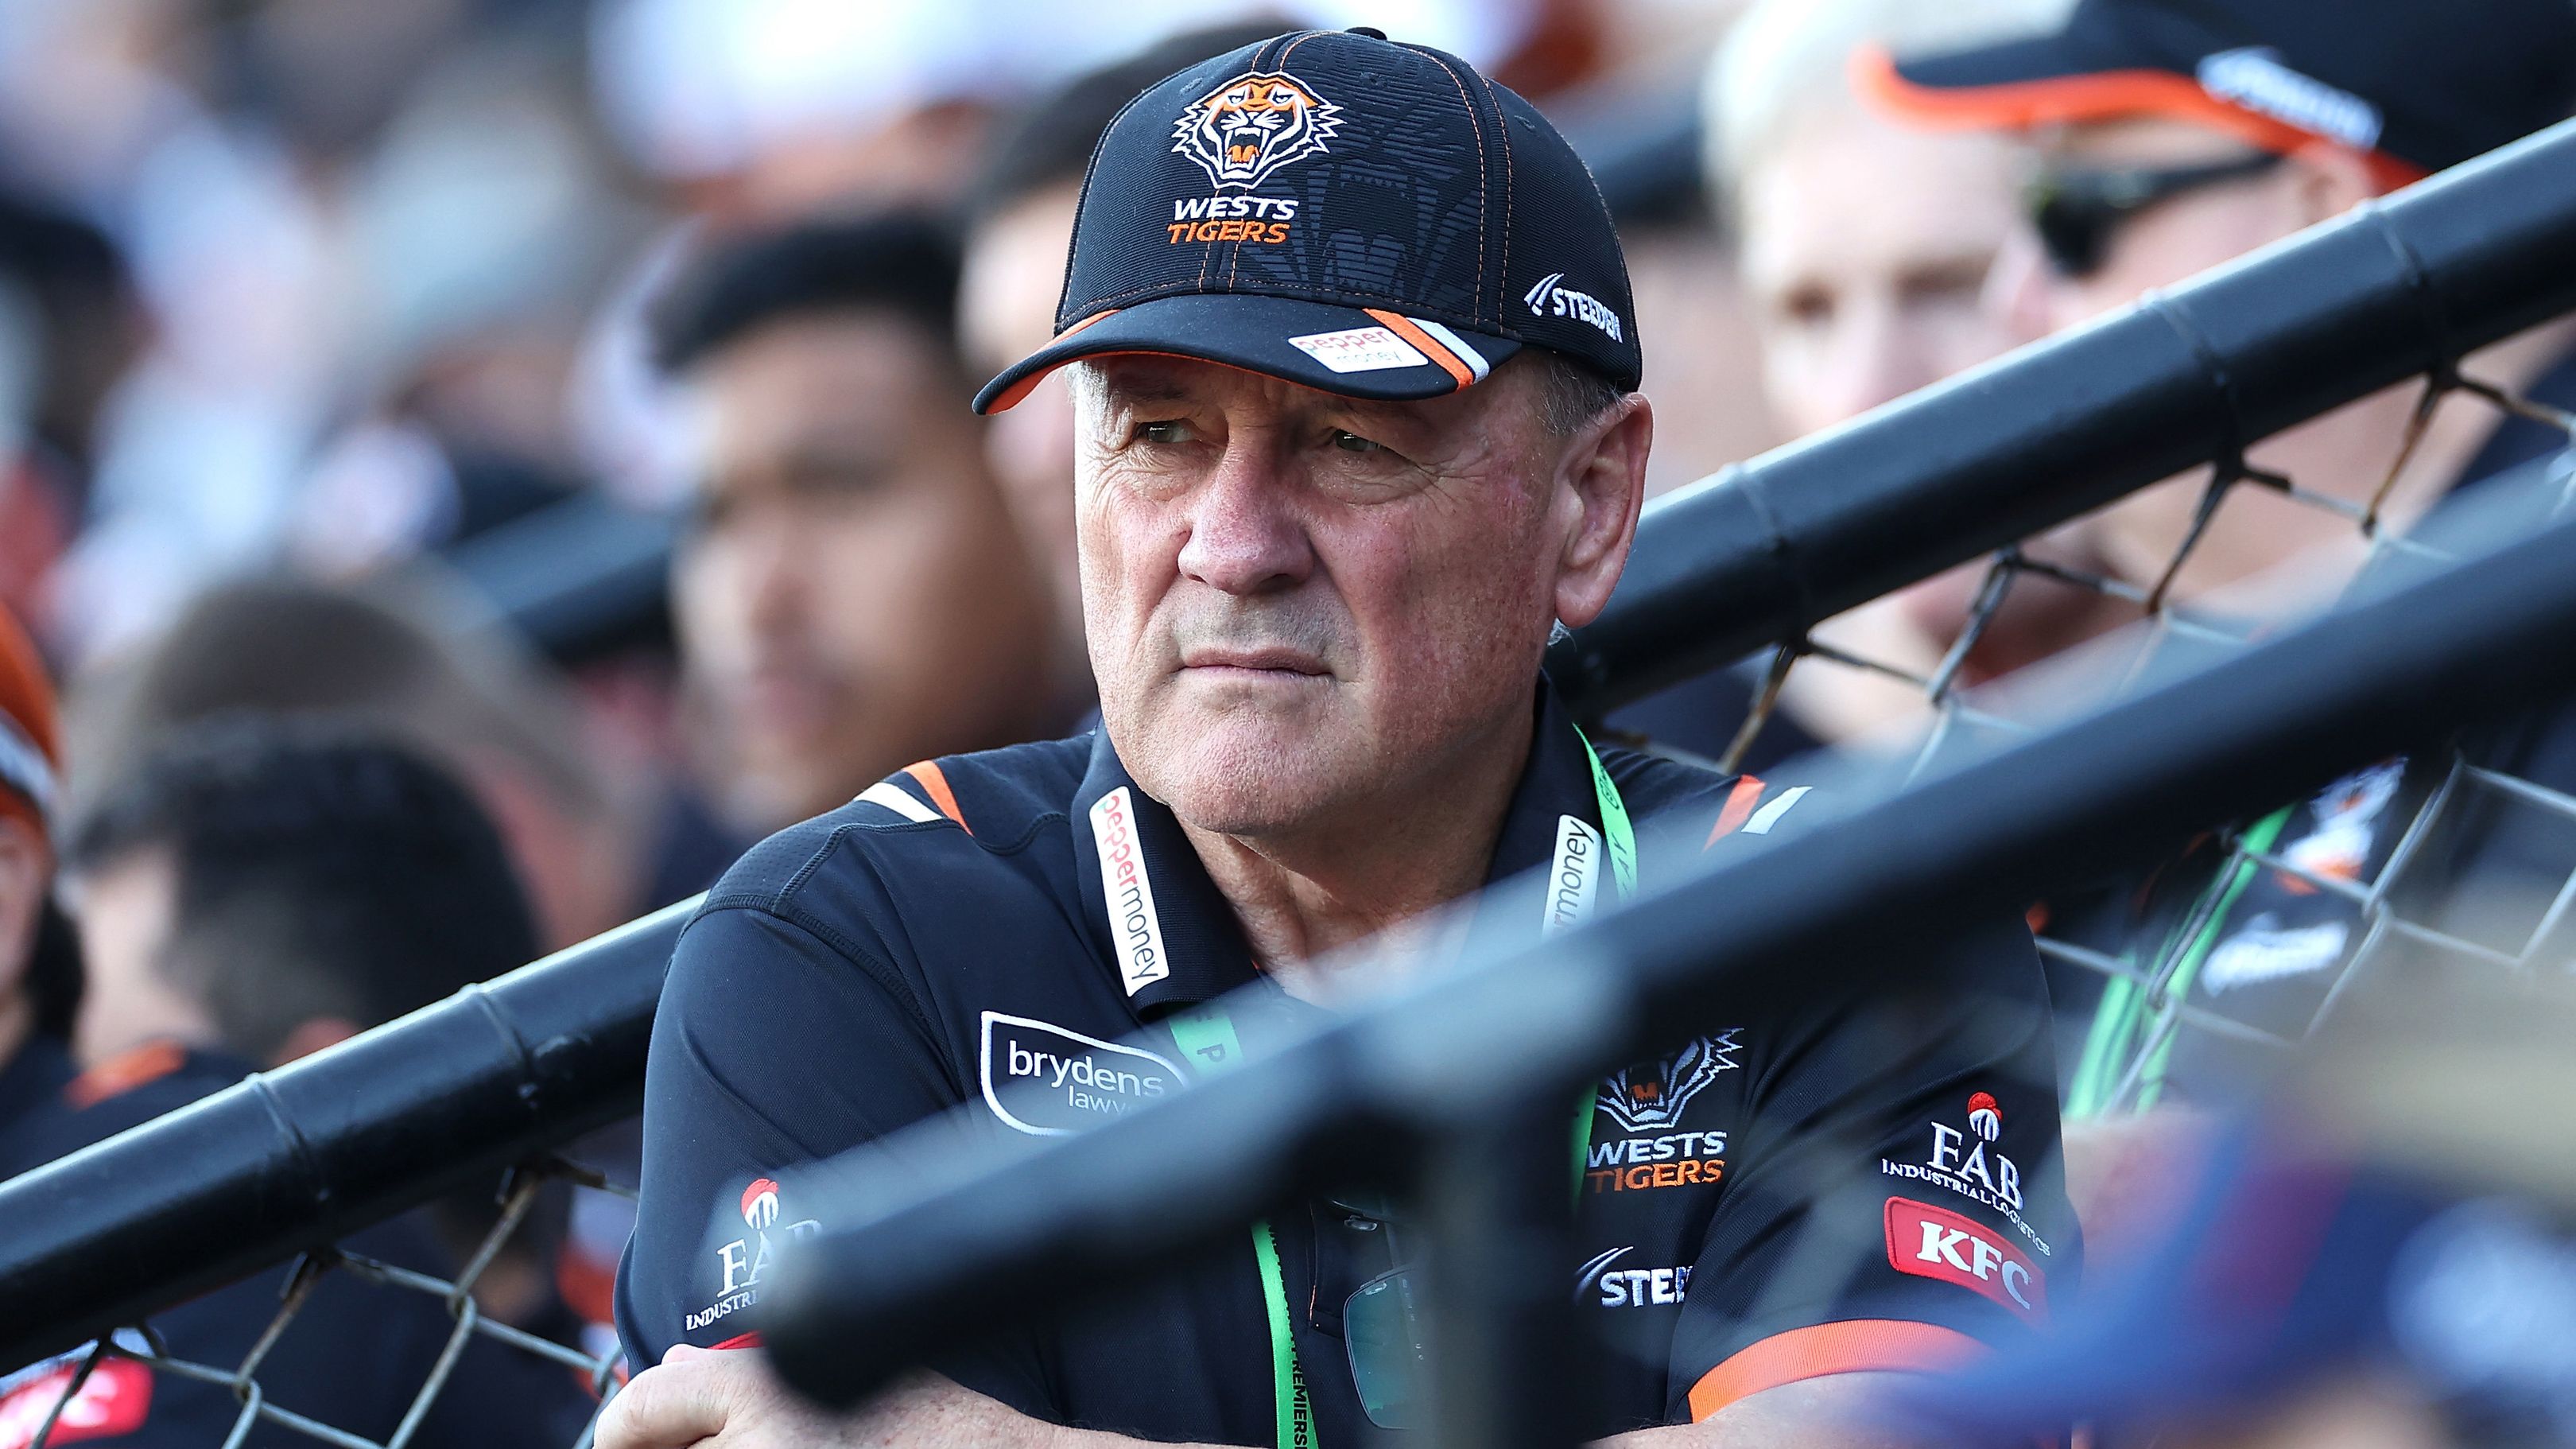 Tigers coach Tim Sheens looks on ahead of the round one NRL match between the Wests Tigers and the Gold Coast Titans at Leichhardt Oval on March 05, 2023 in Sydney, Australia. (Photo by Cameron Spencer/Getty Images)